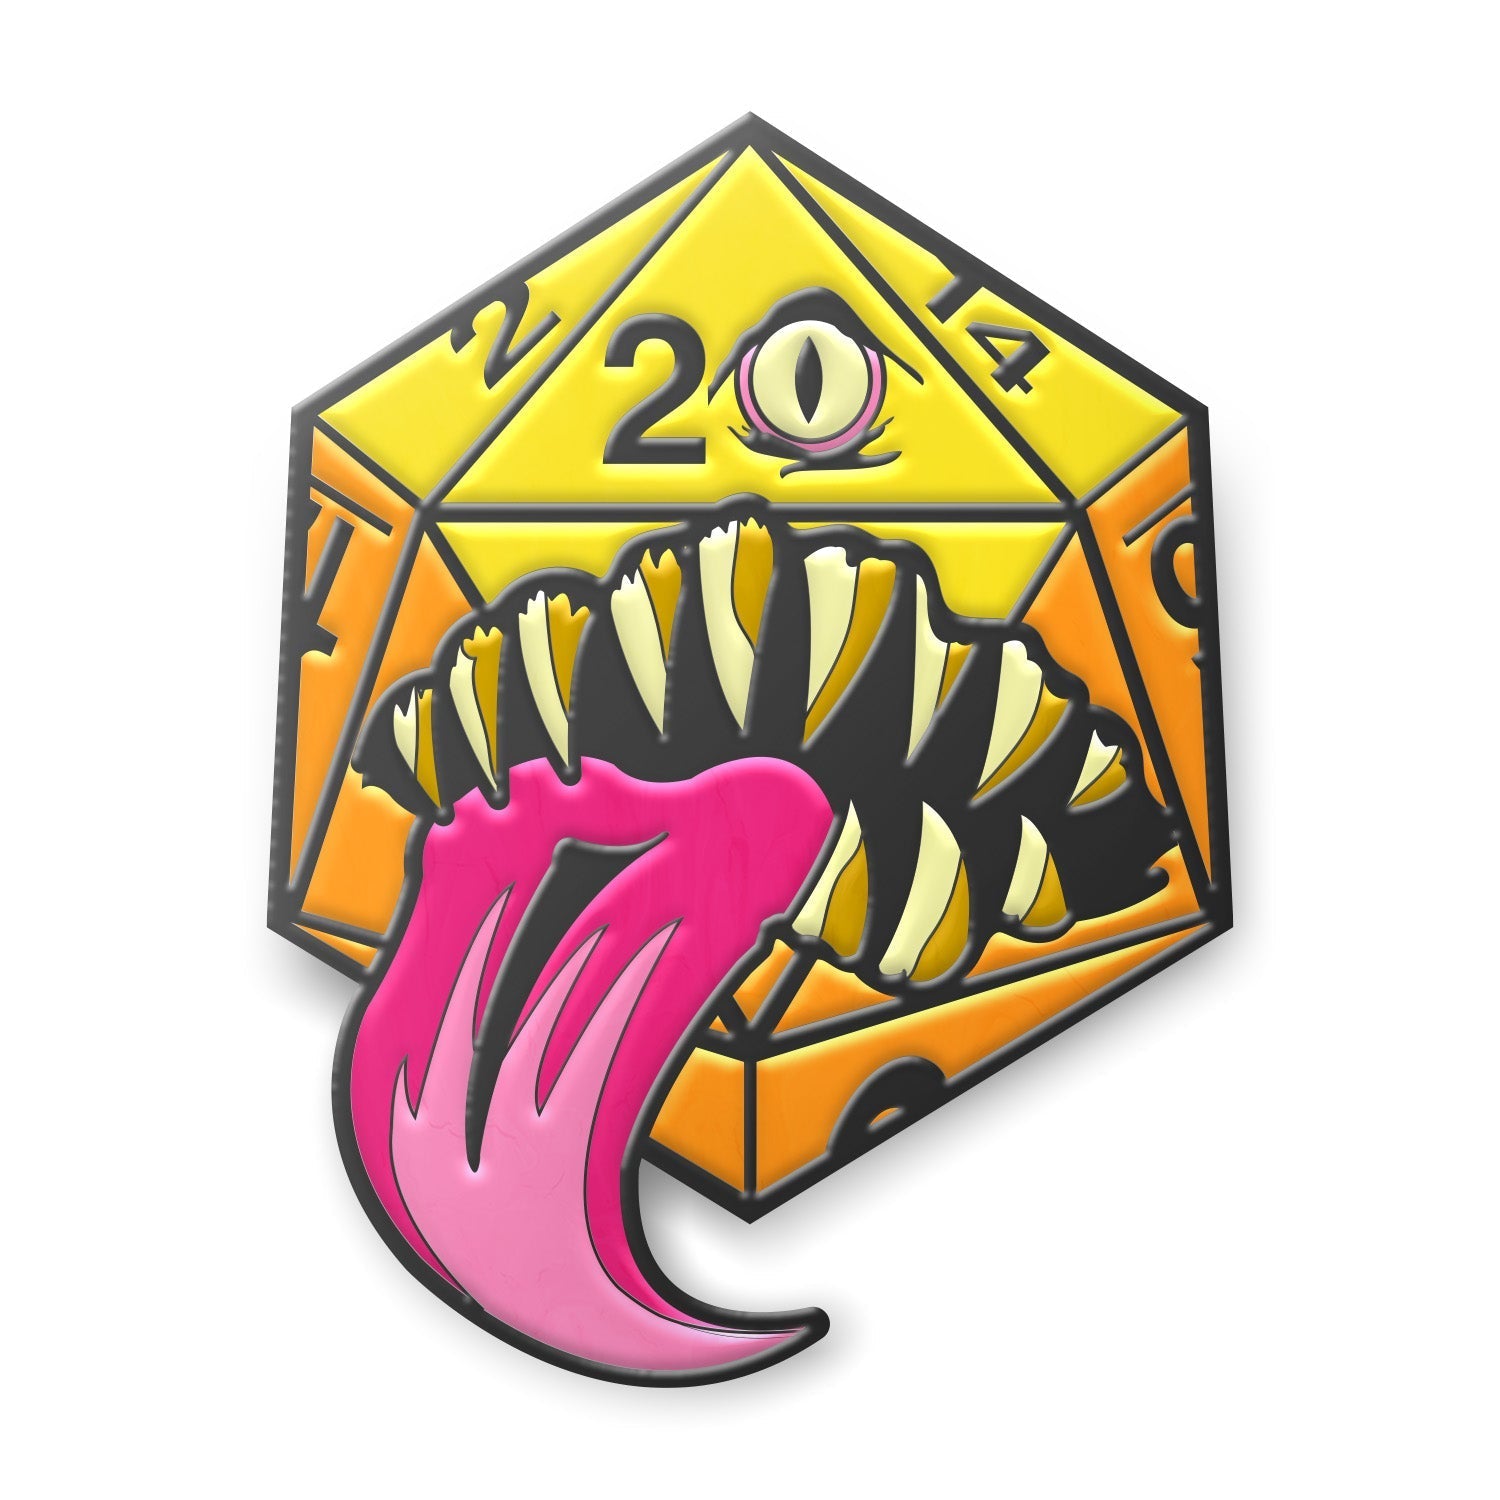 Mimic Die - Hard Enamel Adventure Dice Pin Metal by Norse Foundry - NOR 03645